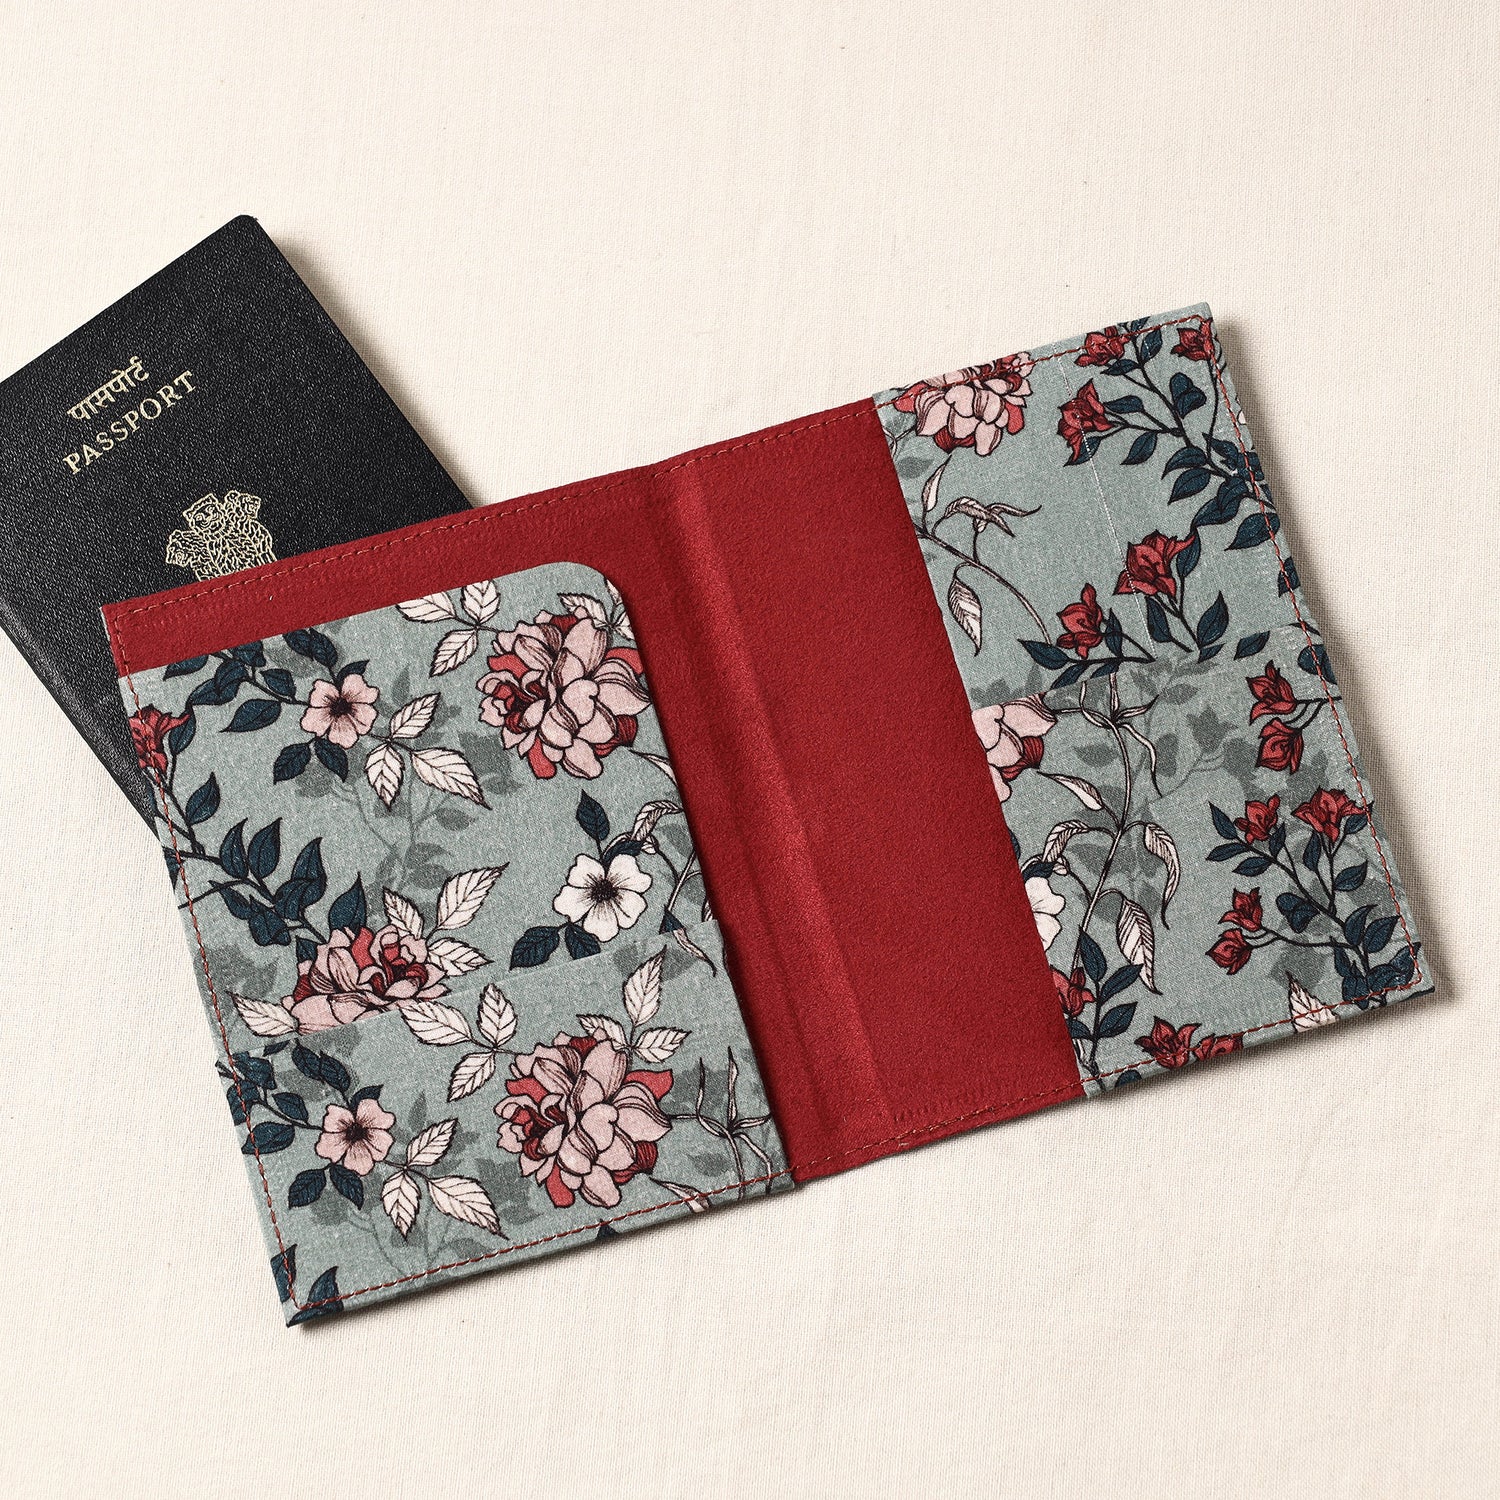 Floral Printed Handcrafted Leather Passport Holder